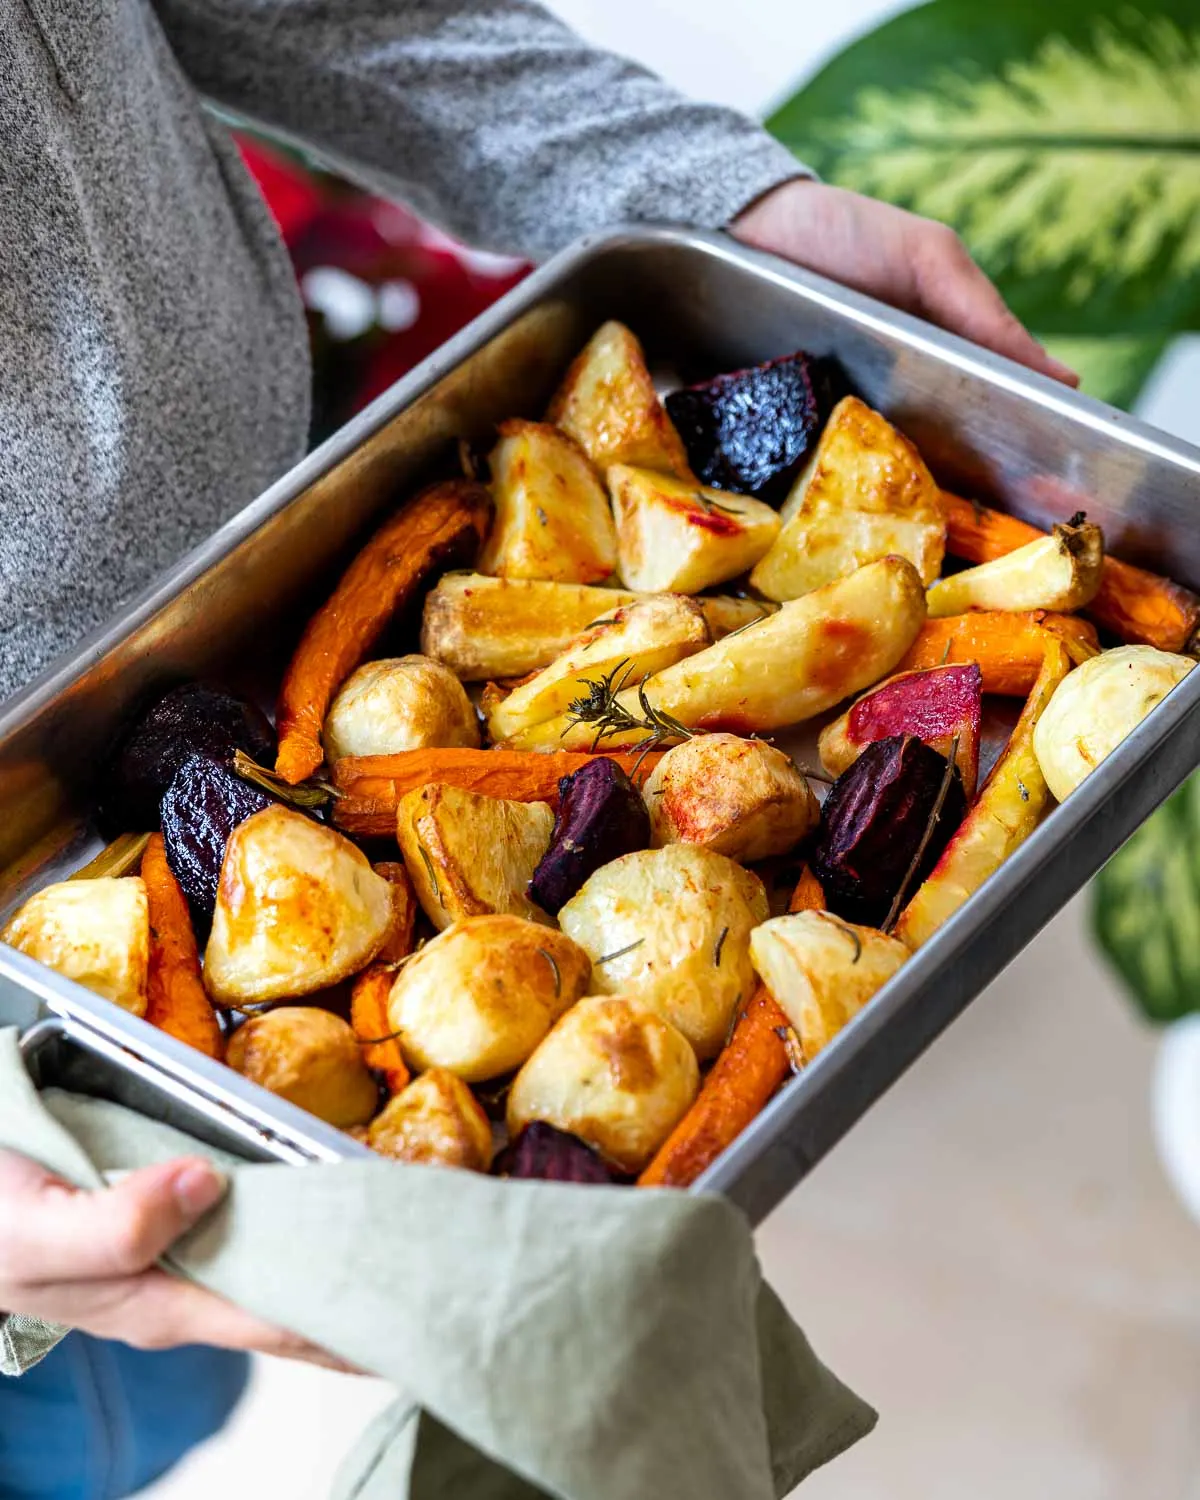 Hands holding a roasting pan of vegetables.